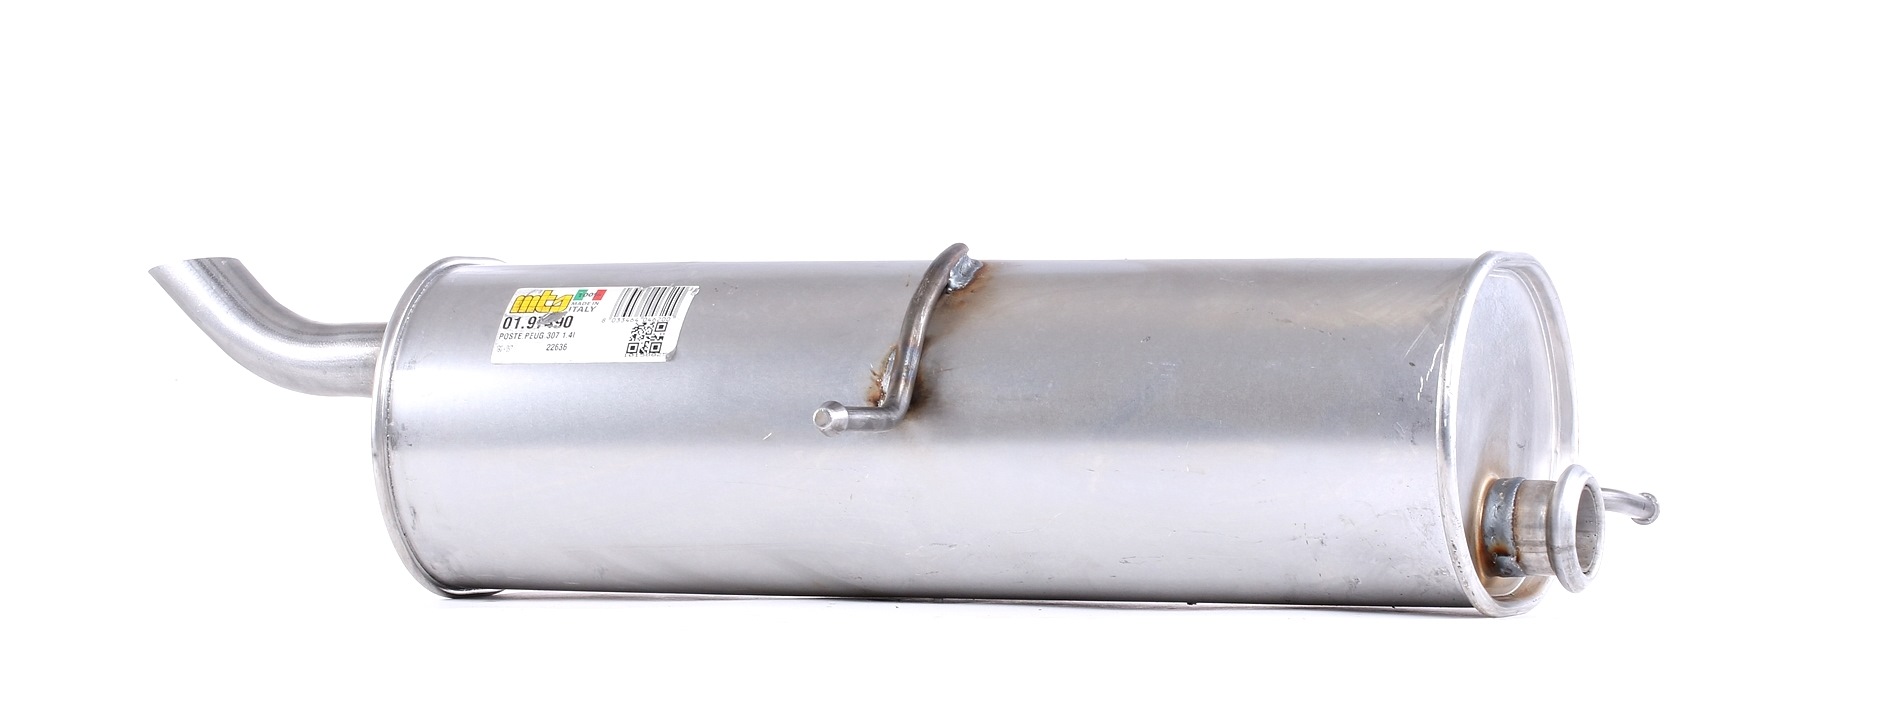 MTS Exhaust silencer universal and sports PEUGEOT 207 Saloon new 01.97490